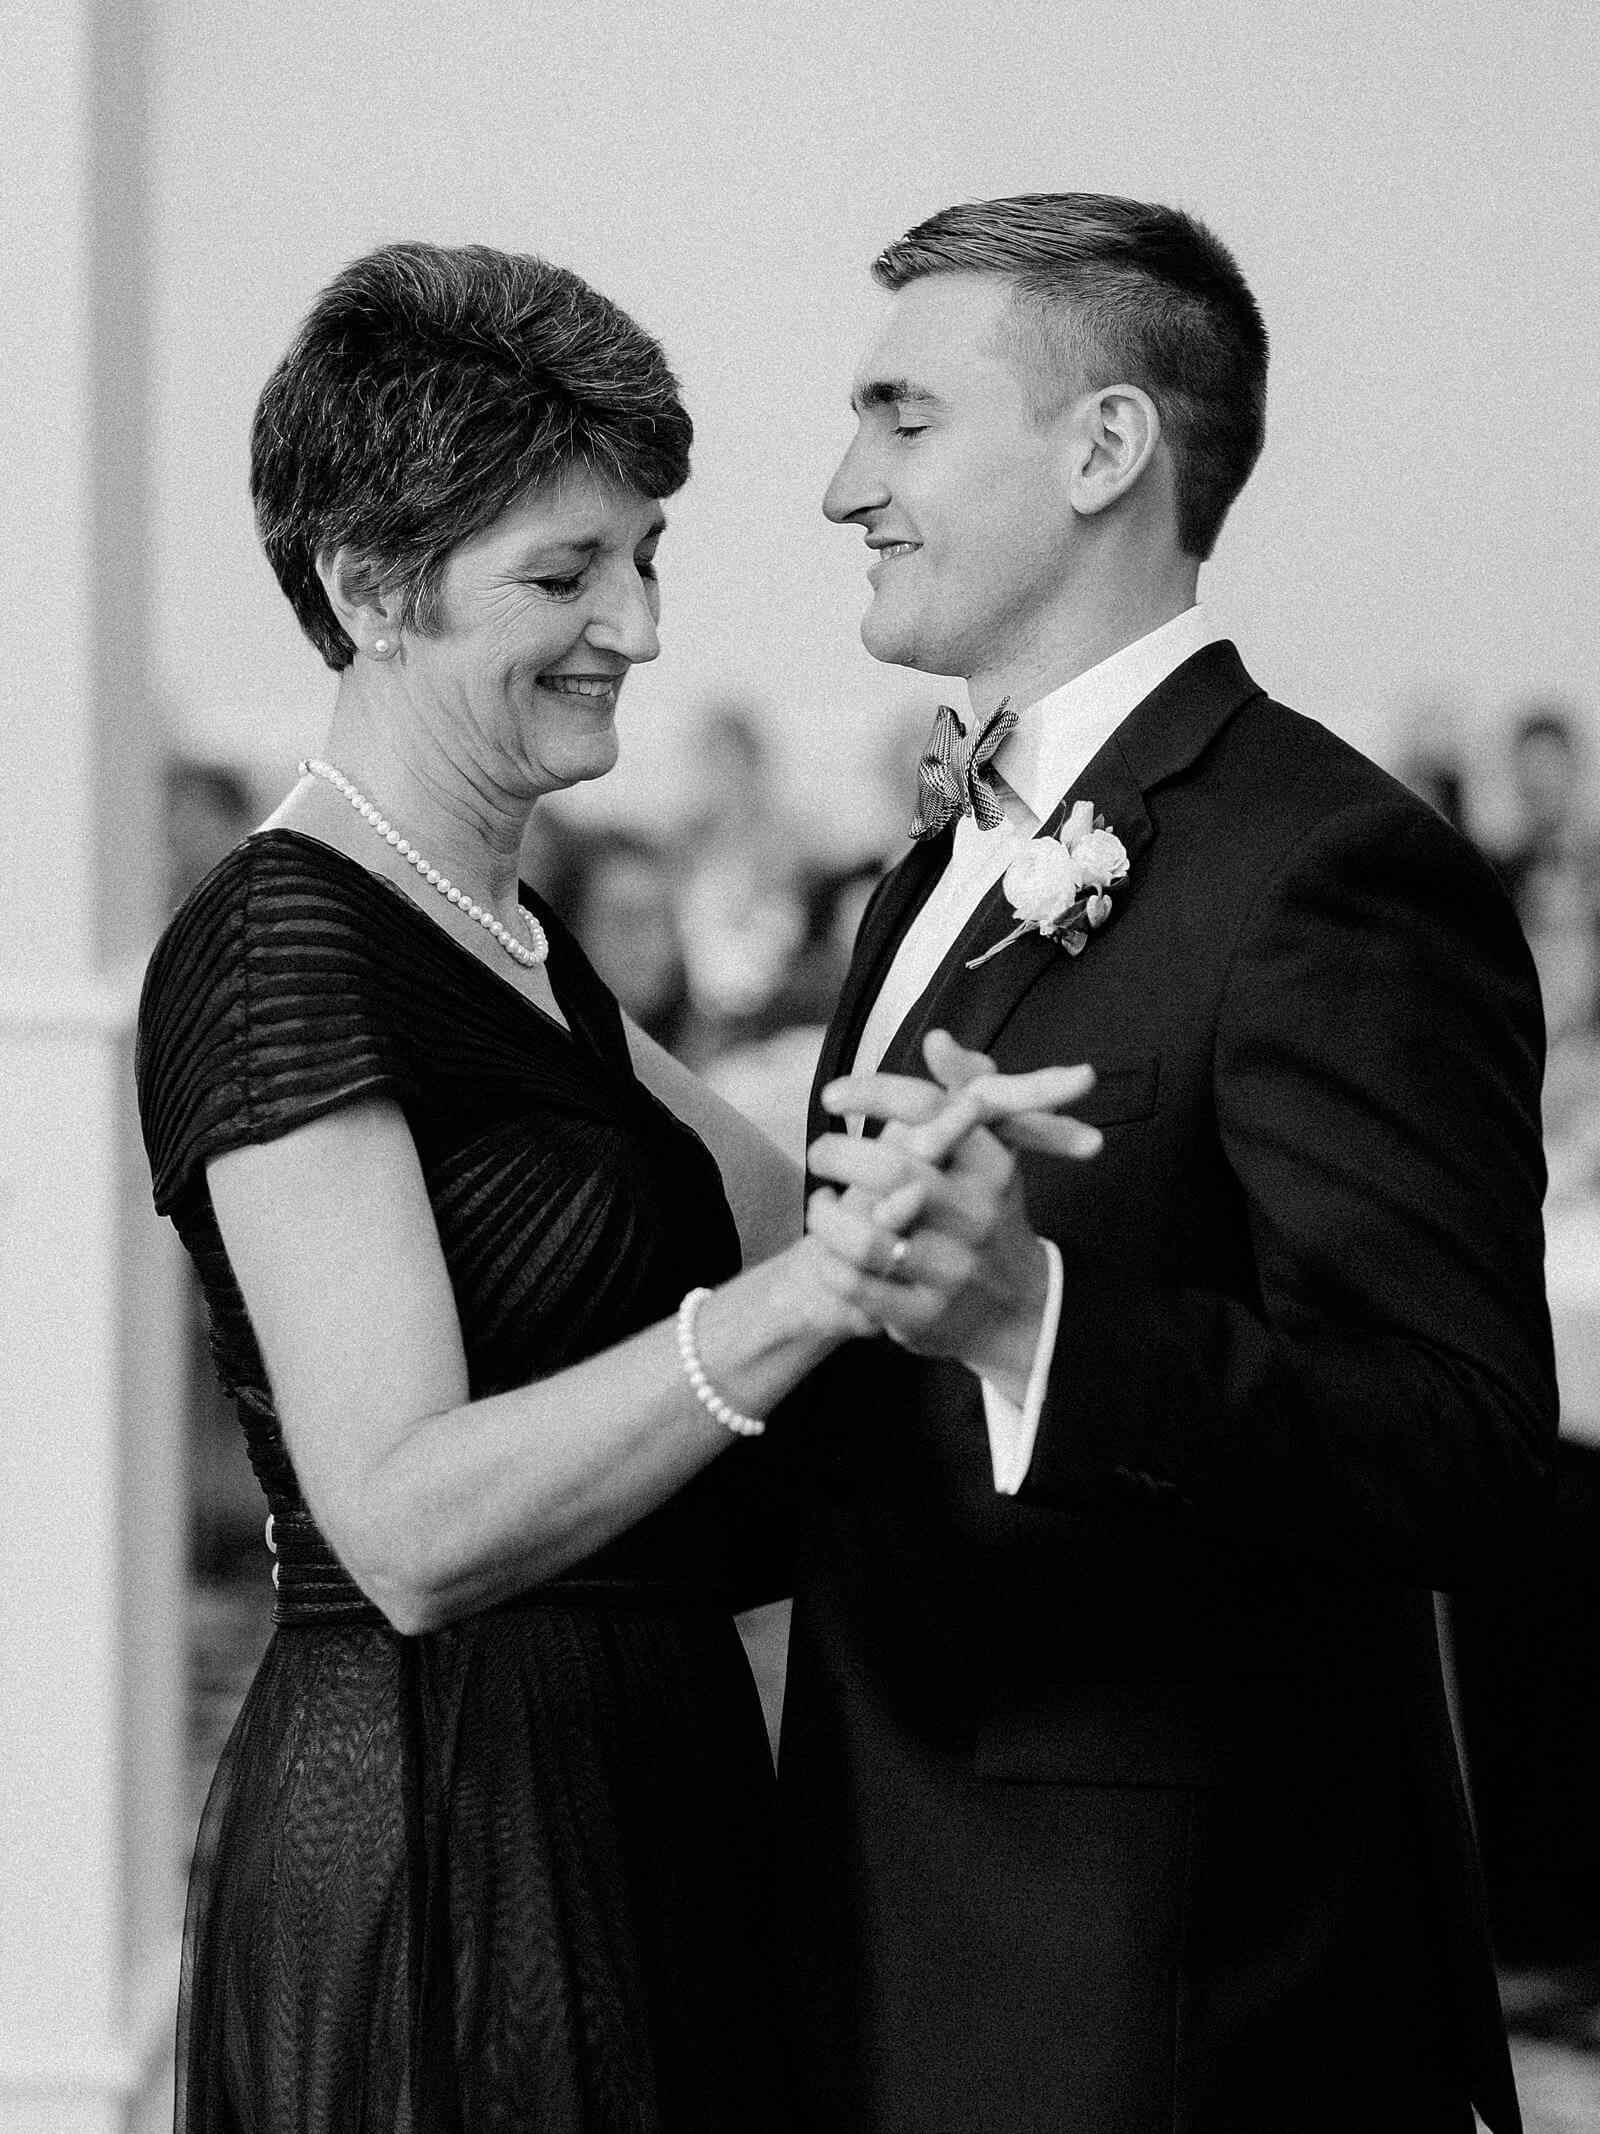 Mother son dance at a wedding at Trump Winery Grand Hall